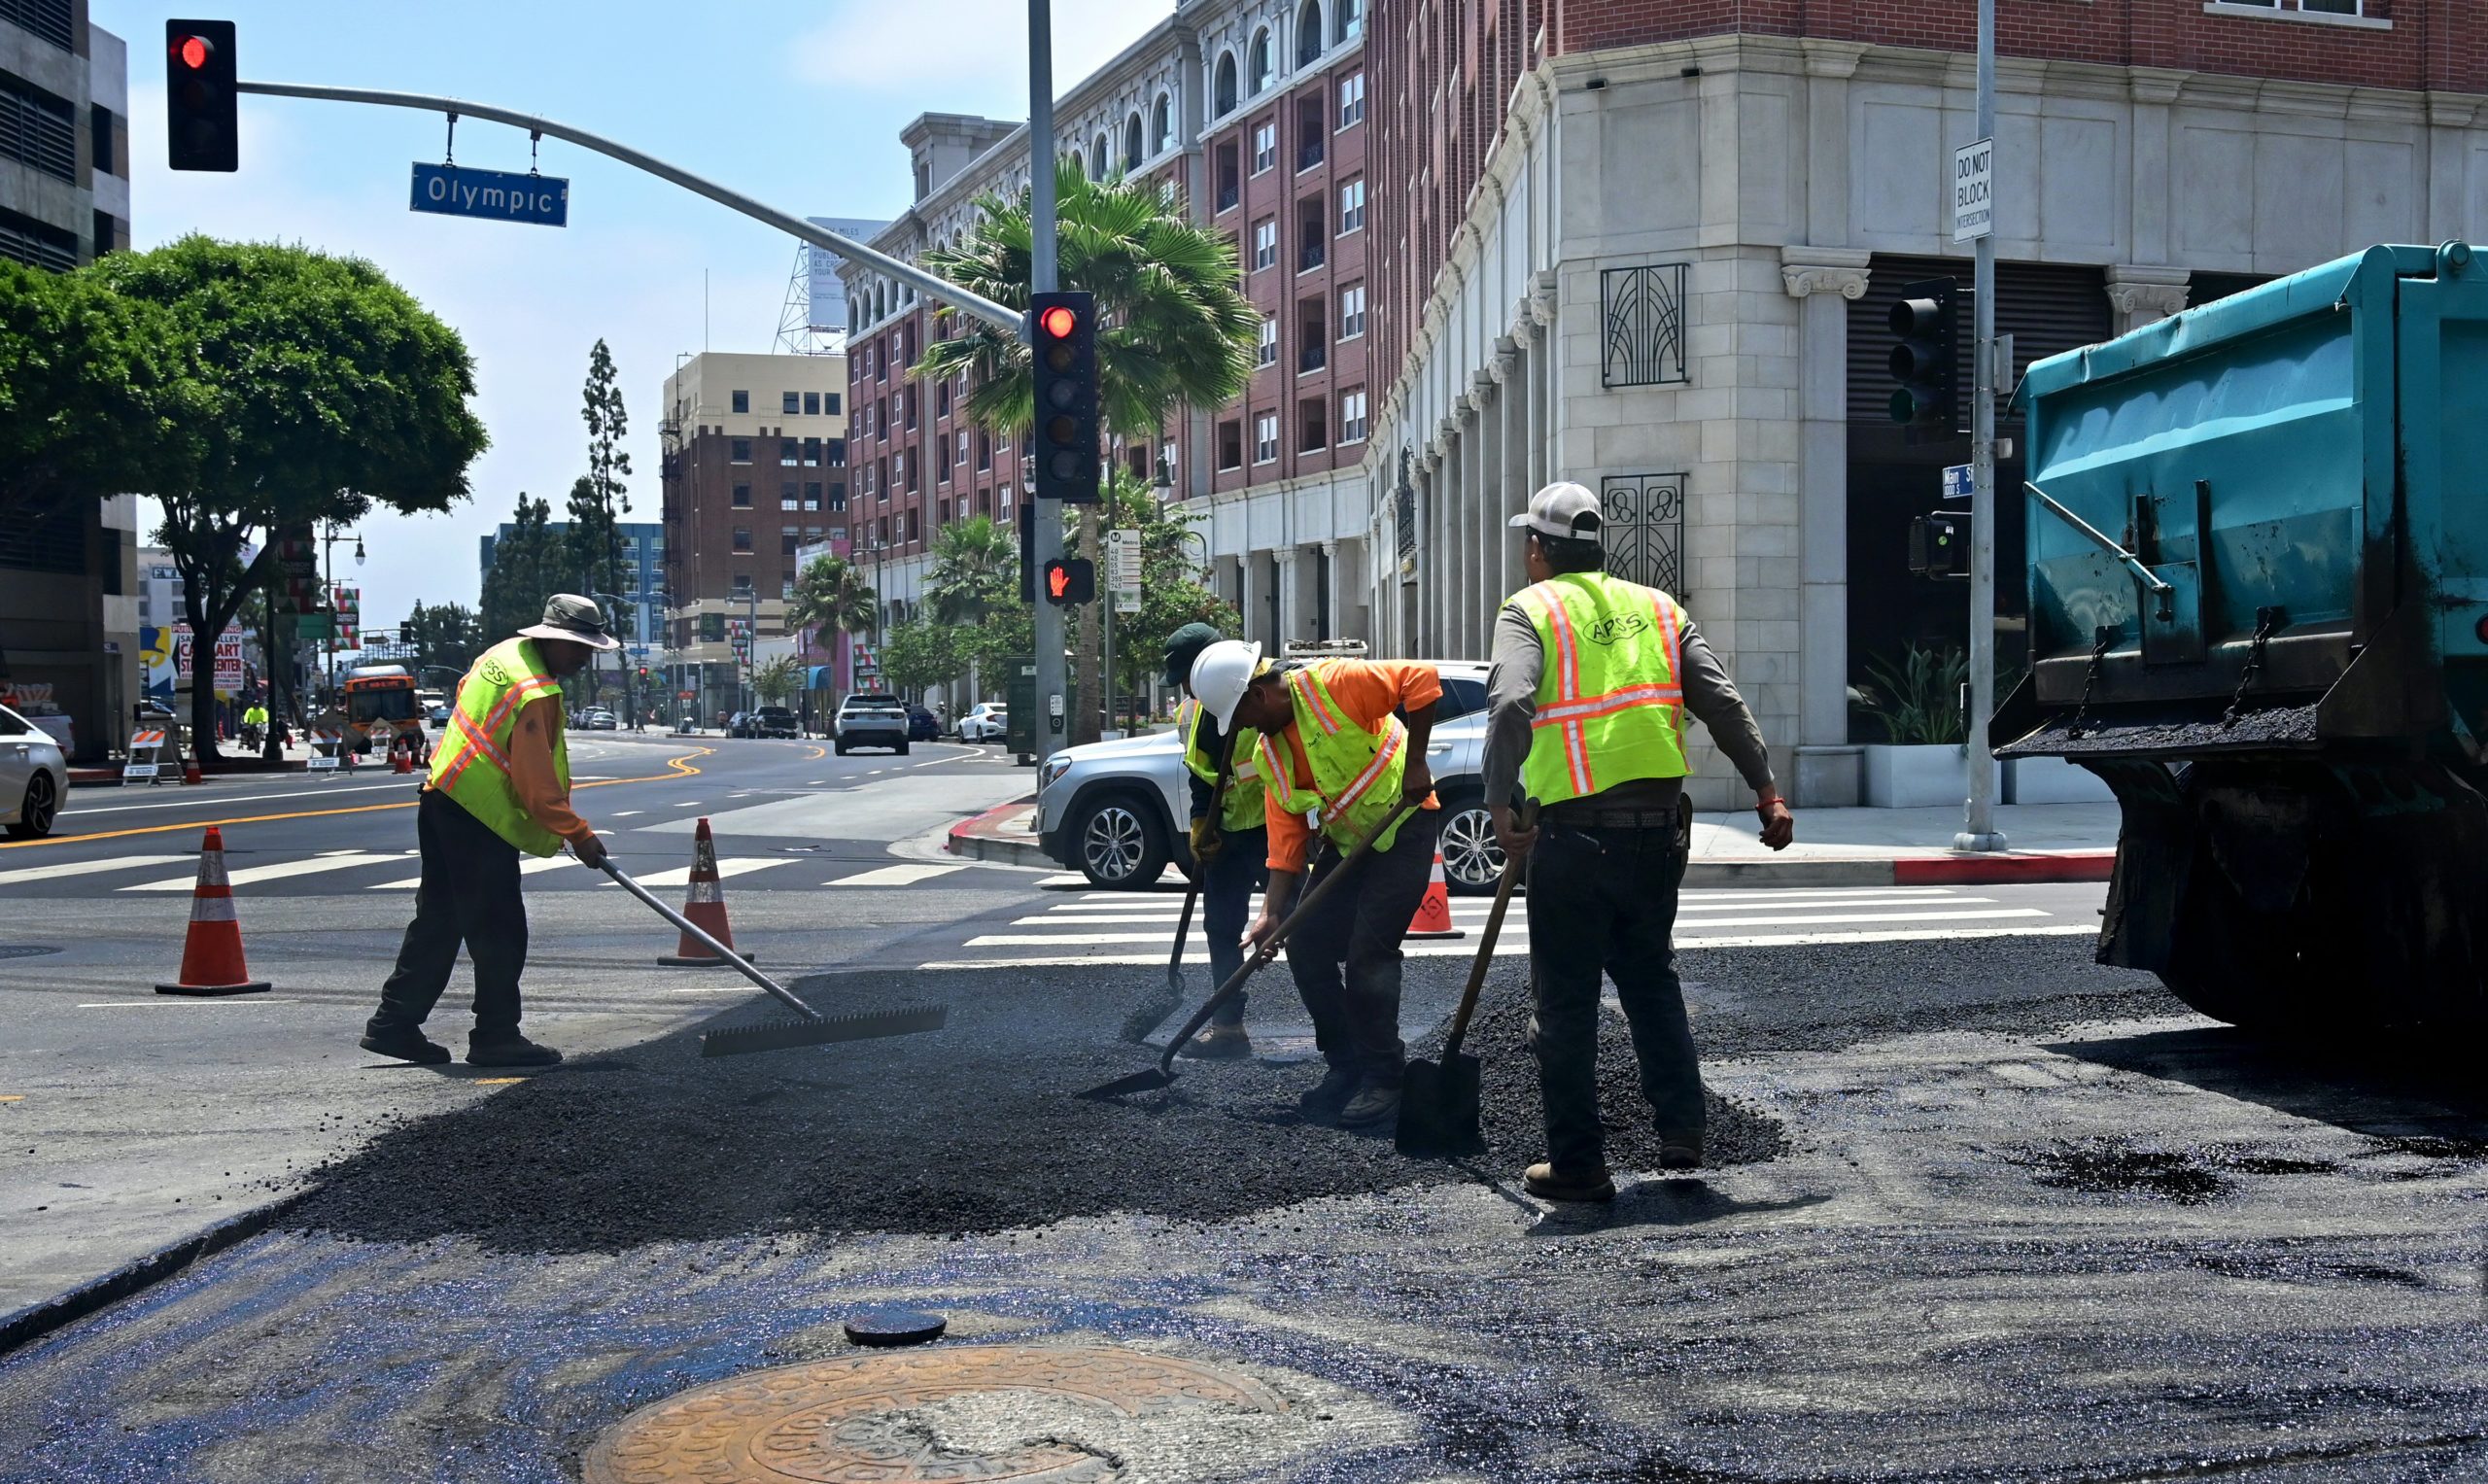 Workers resurface a road by pouring a new layer of asphalt in Los Angeles, California on June 24, 2019. (Frederic J. Brown/AFP via Getty Images)